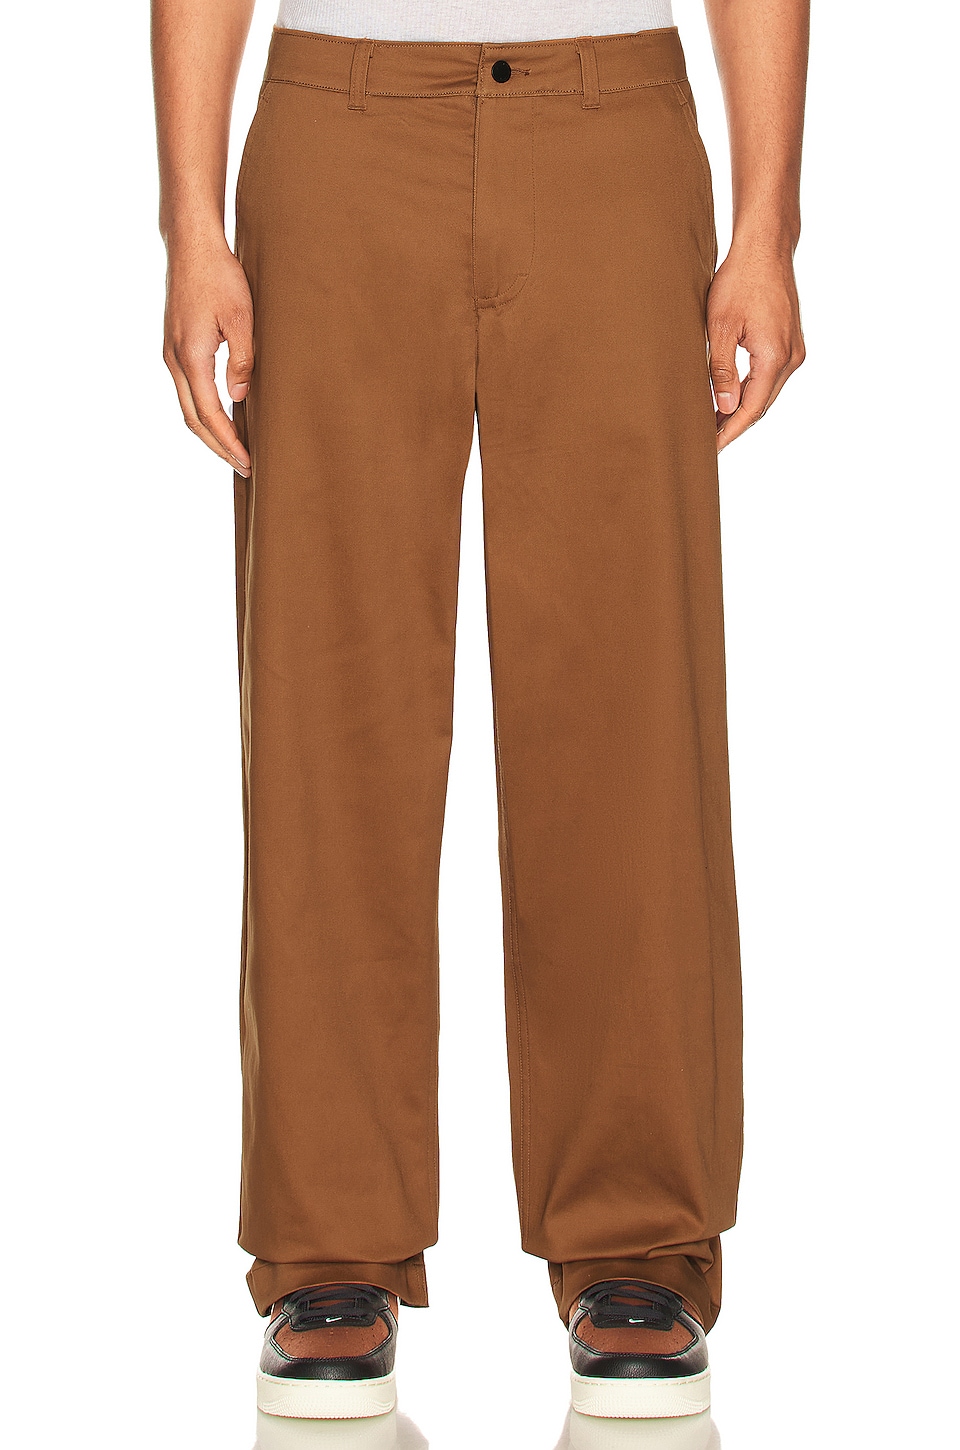 Brown/White | in M Ale Nl Cotton REVOLVE El Pant Ul Nike Chino